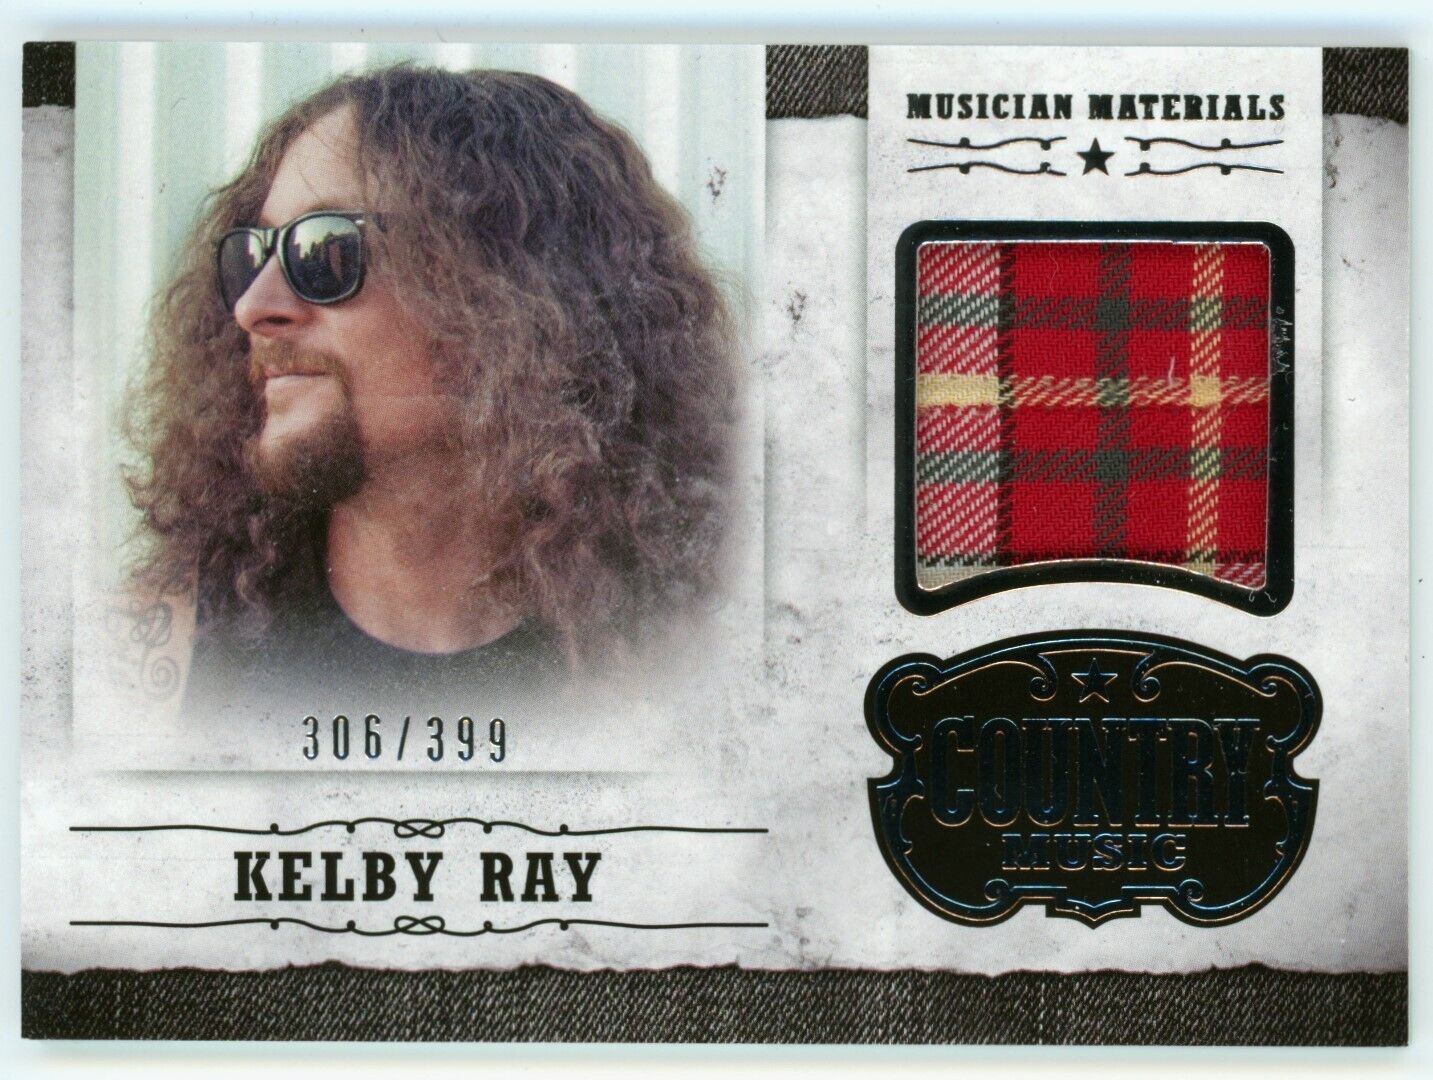 2014 Panini Country Music Materials Silver M-KR Kelby Ray 306/399 Cadillac Three